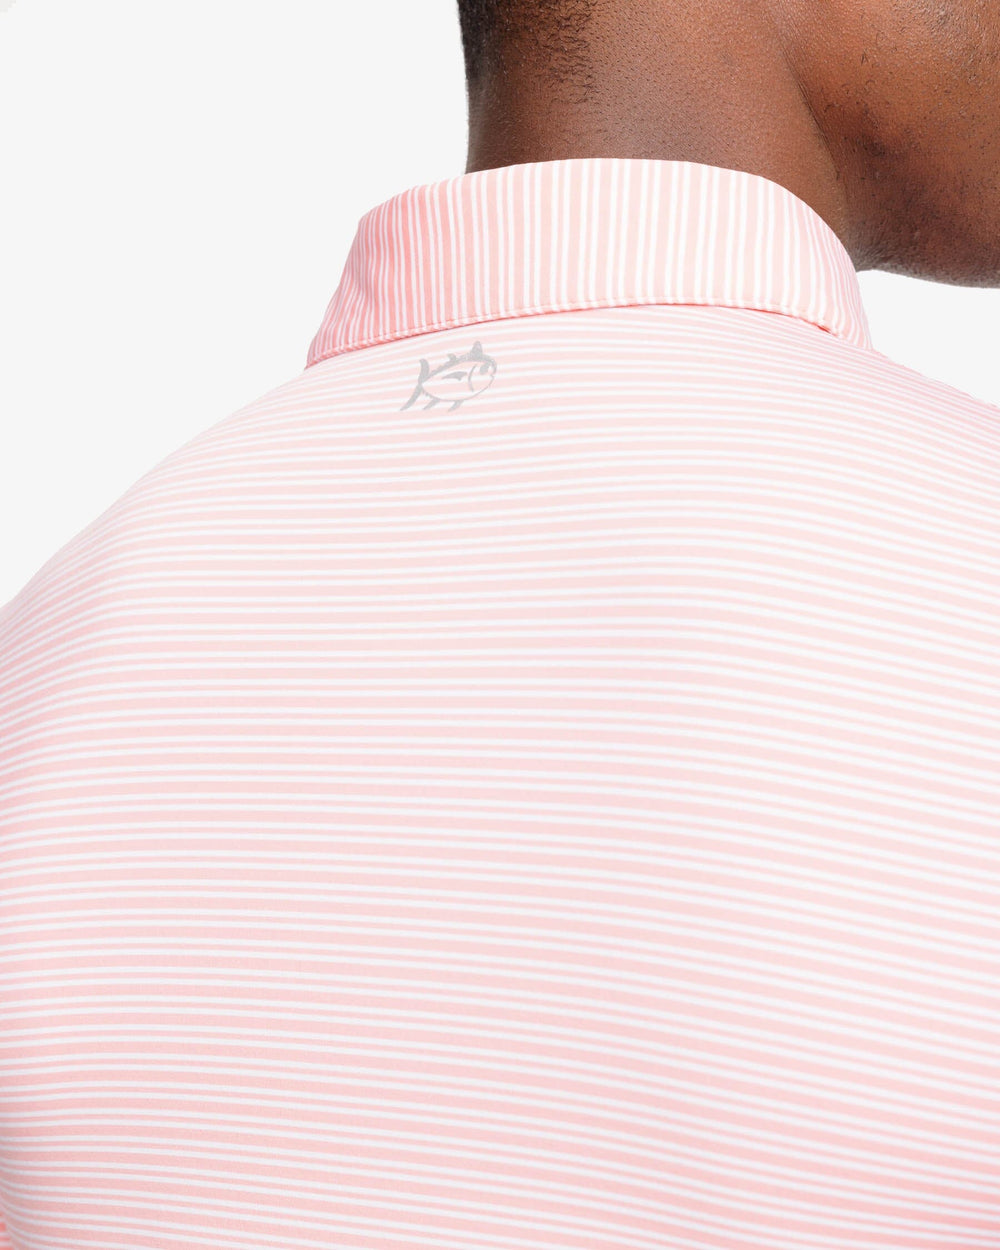 The yoke view of the Southern Tide brrr-eeze Millwood Stripe Performance Polo Shirt by Southern Tide - Flamingo Pink